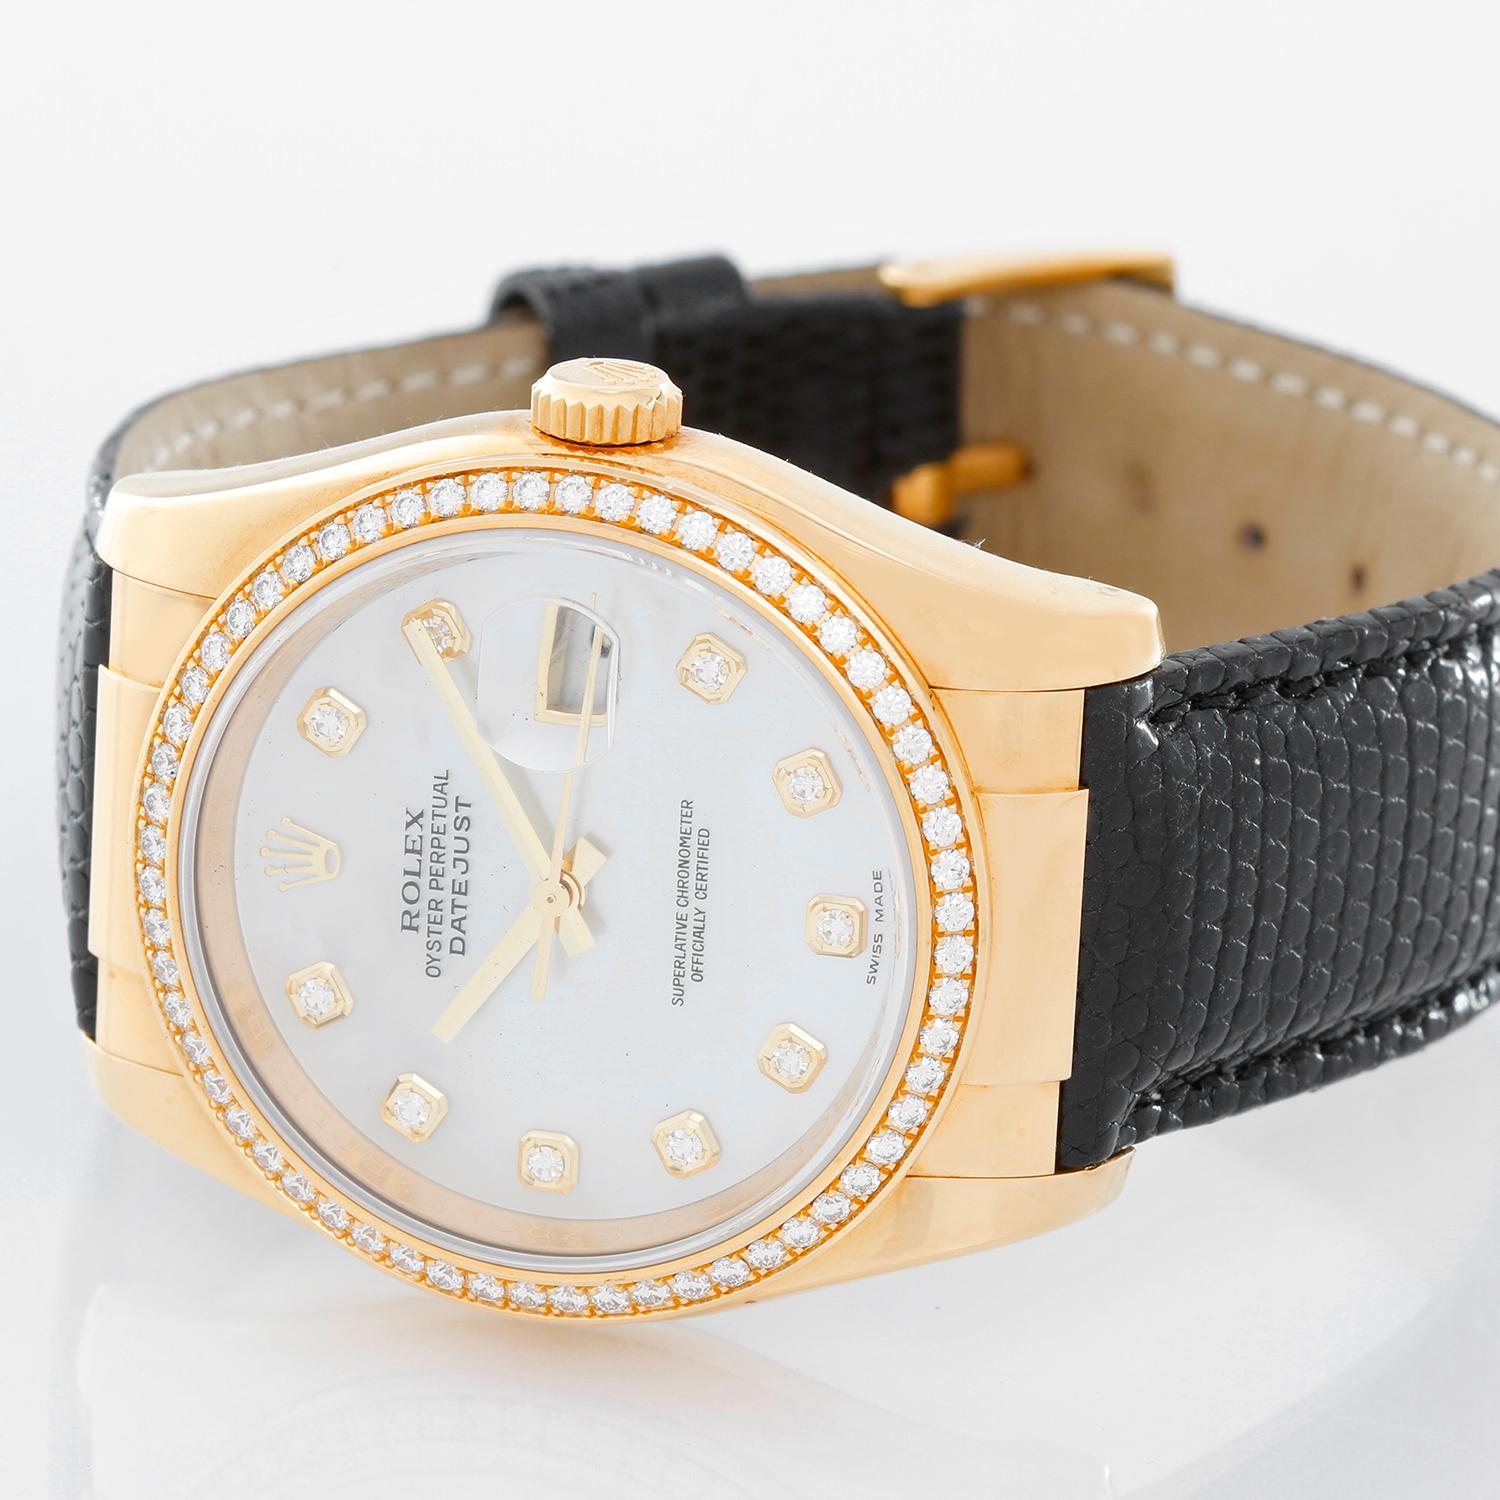 Rolex Datejust 18k Yellow Gold Men's Watch on Leather Strap Band 116188 - Automatic winding, 31 jewels, Quickset, sapphire crystal. 18k yellow gold case with  custom diamond bezel (36mm diameter). Factory Mother of pearl dial with diamond hour